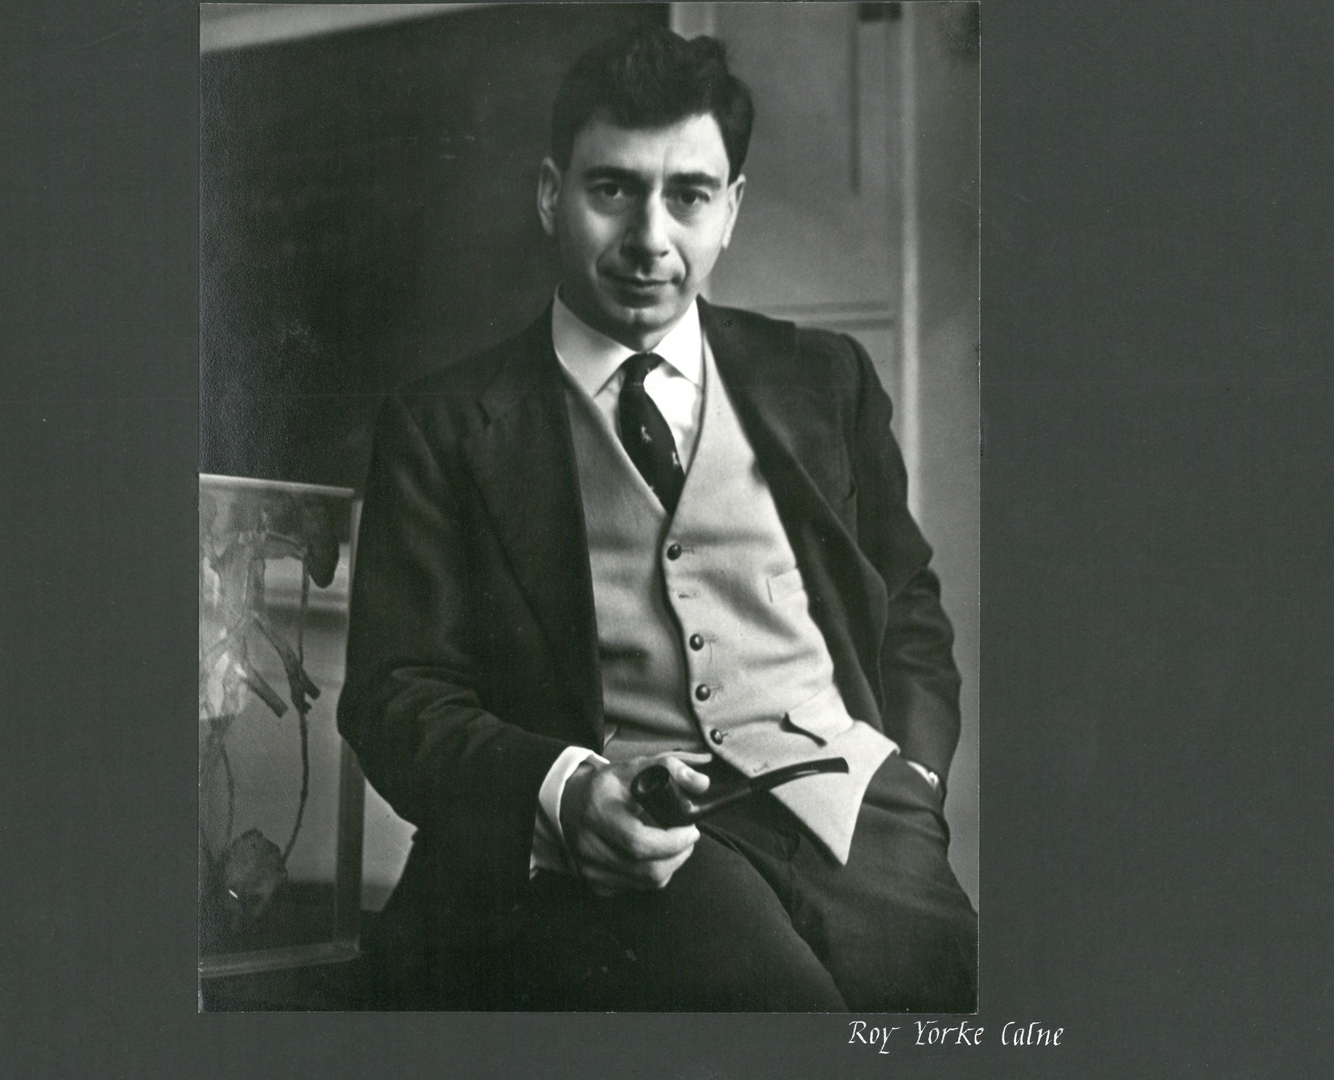 Black and white image of Sir Roy Calne in his early years as a Fellow at Trinity Hall, Cambridge. He is in a jacket with tie and holding a pipe.